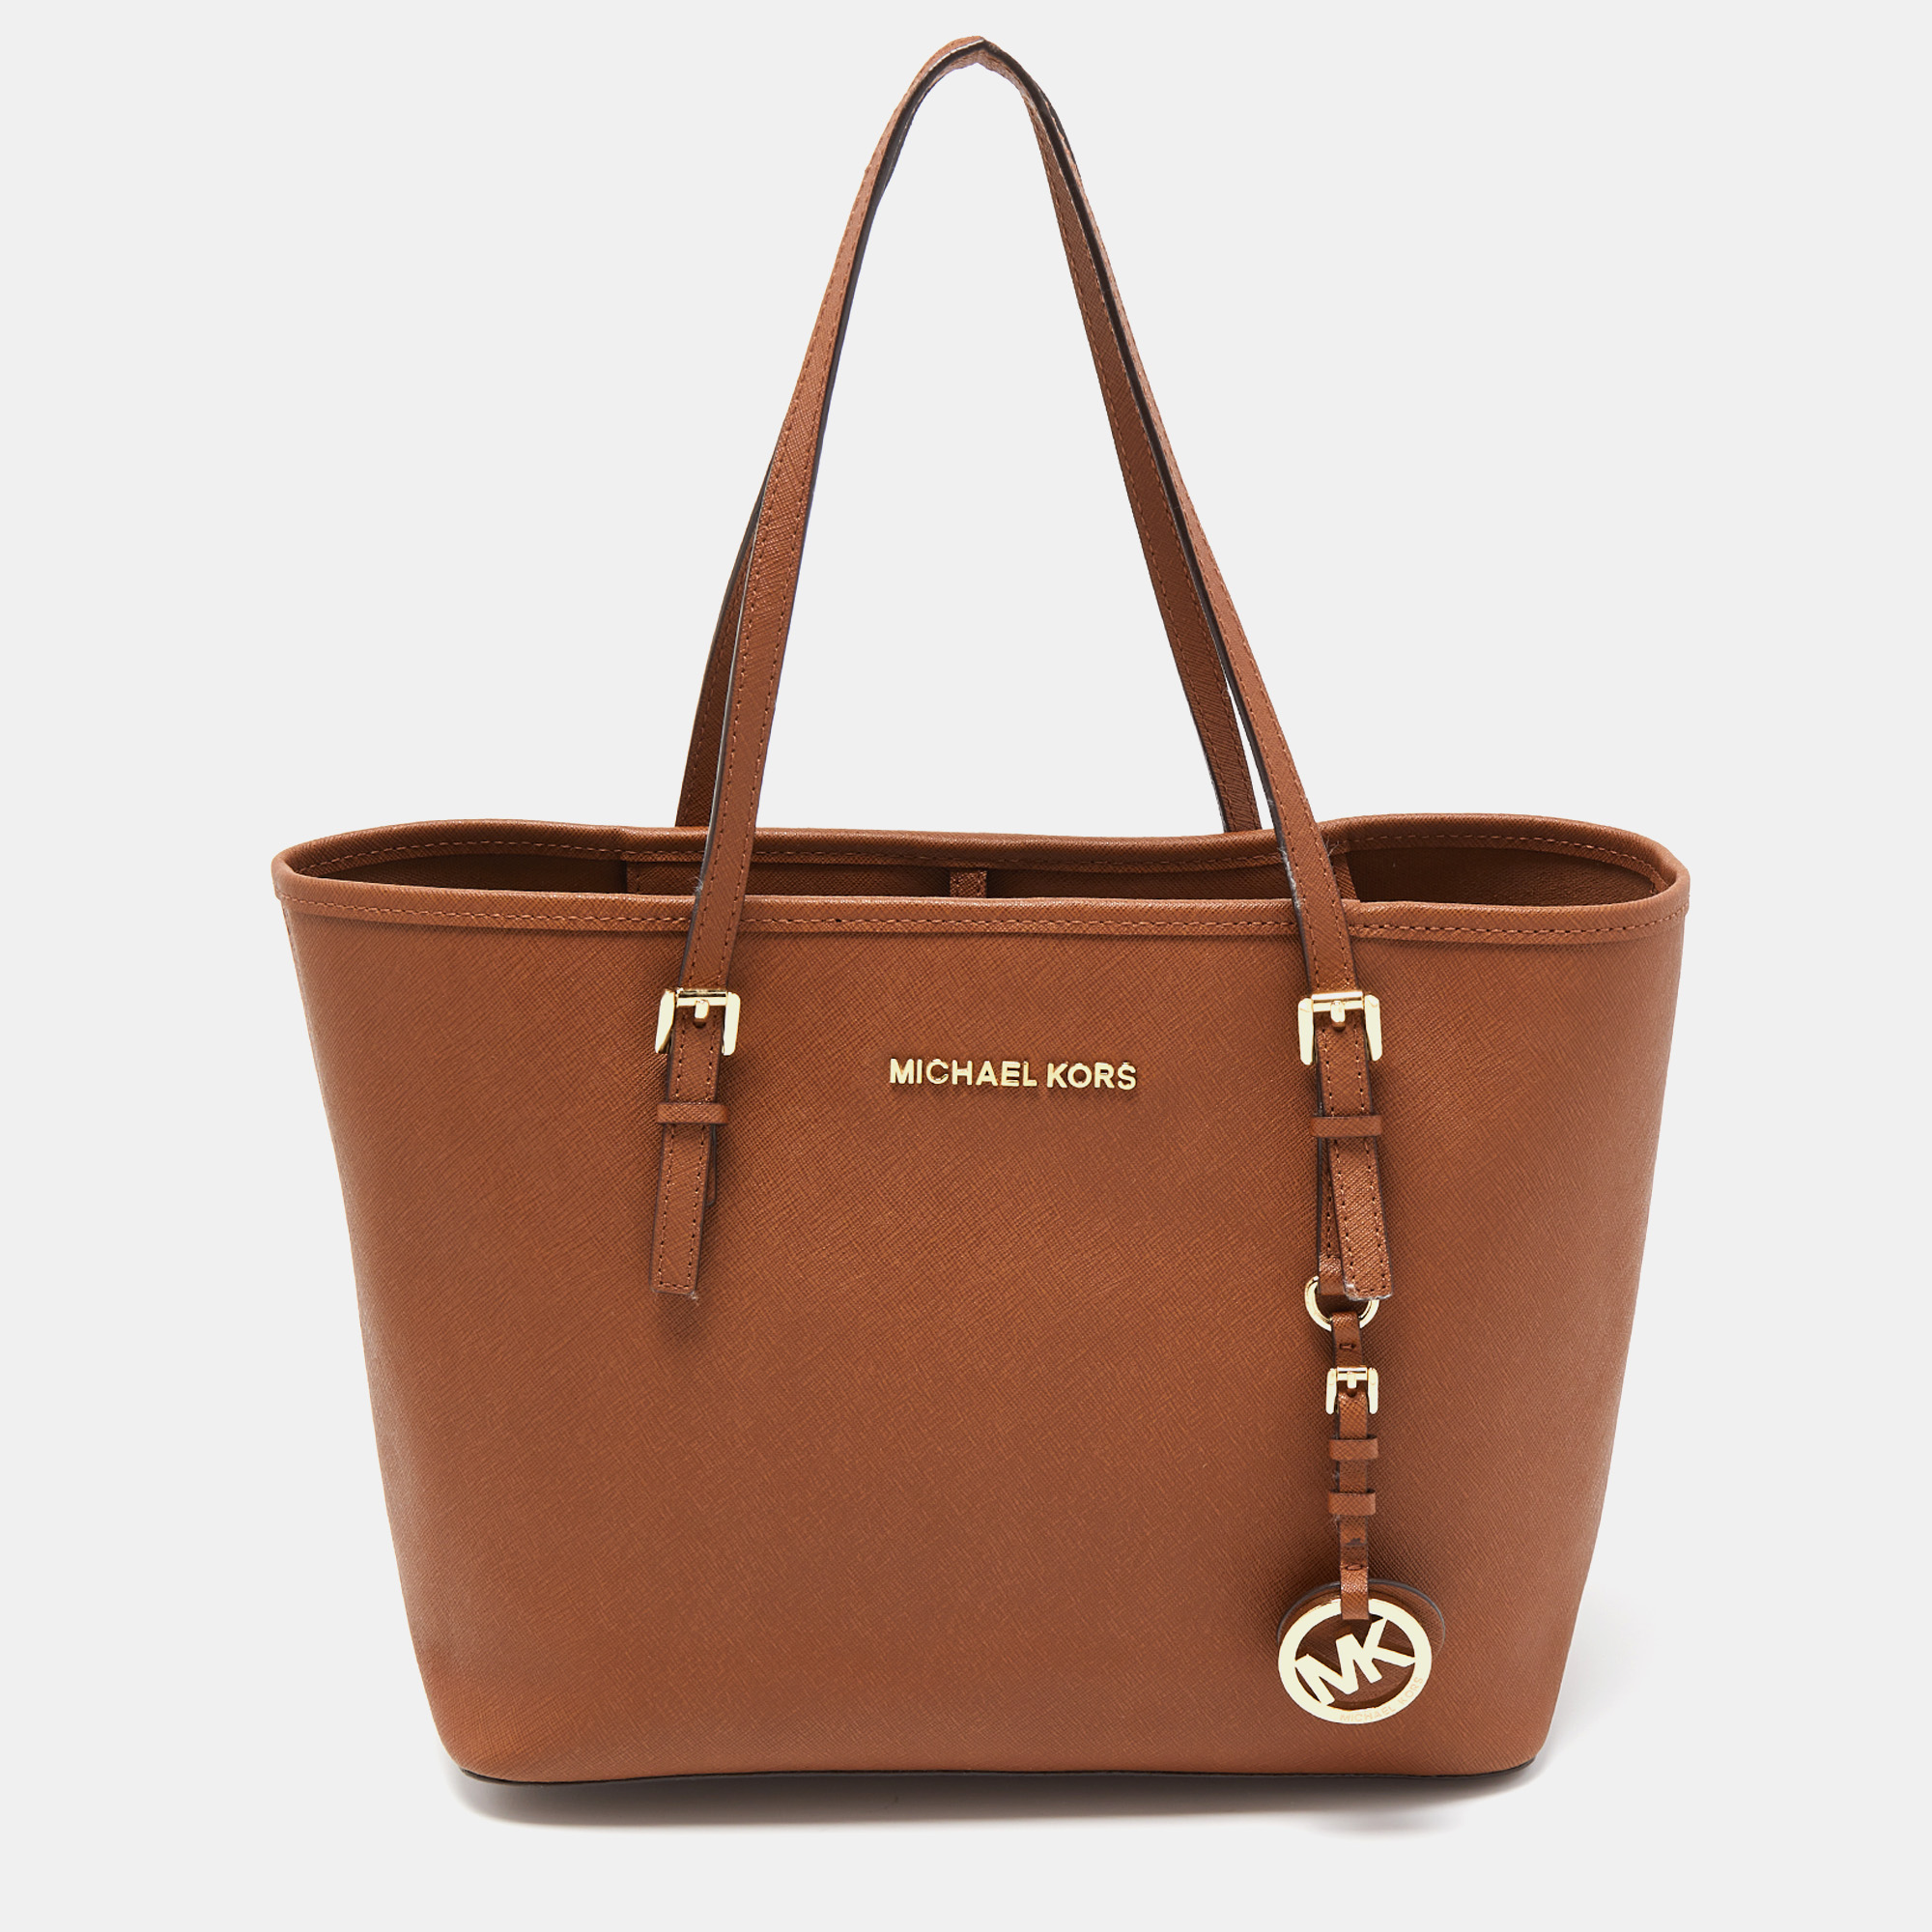 MICHAEL Michael Kors Brown Saffiano Leather Small Jet Set Travel Tote